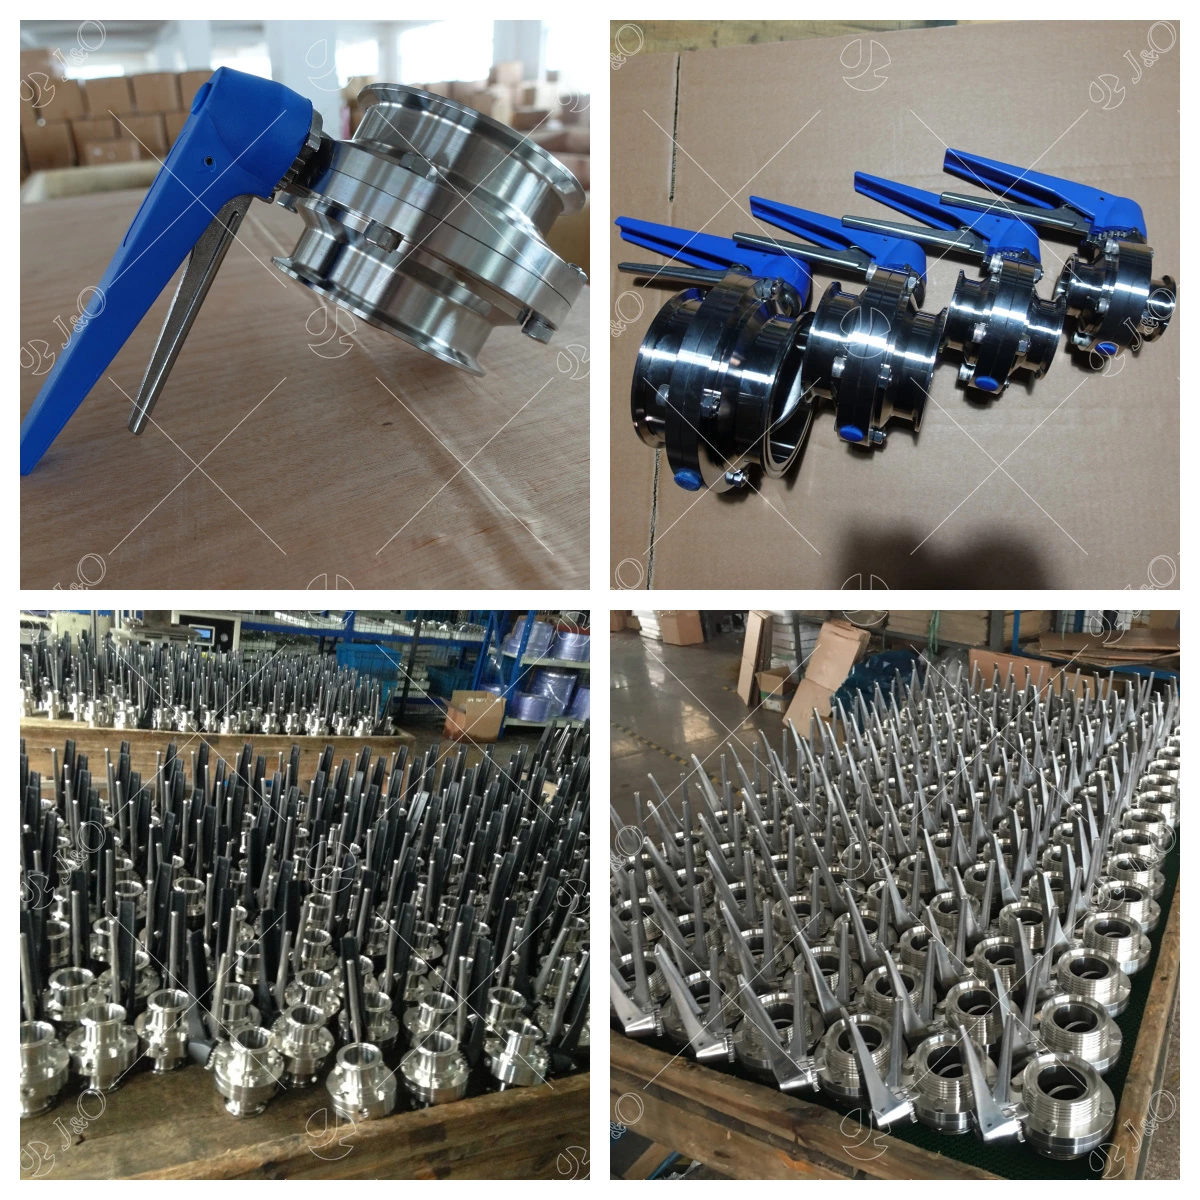 Sanitary Stainless Steel Tri-Clamp Butterfly Valve, Multi-Postion Gripper Handle